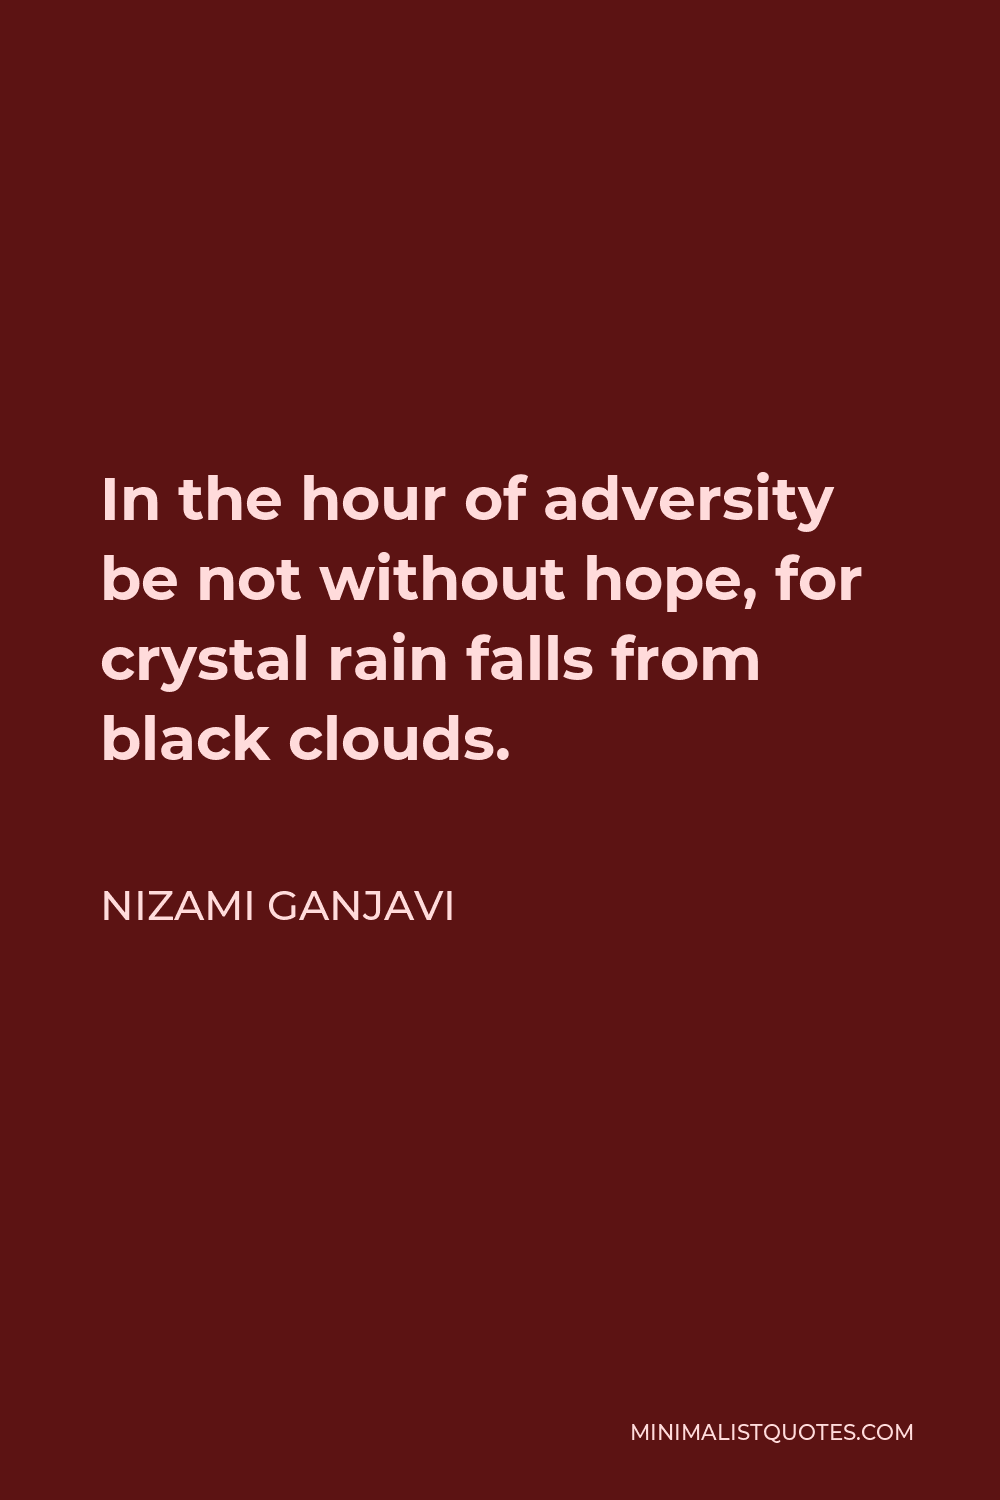 Nizami Ganjavi Quote - In the hour of adversity be not without hope, for crystal rain falls from black clouds.